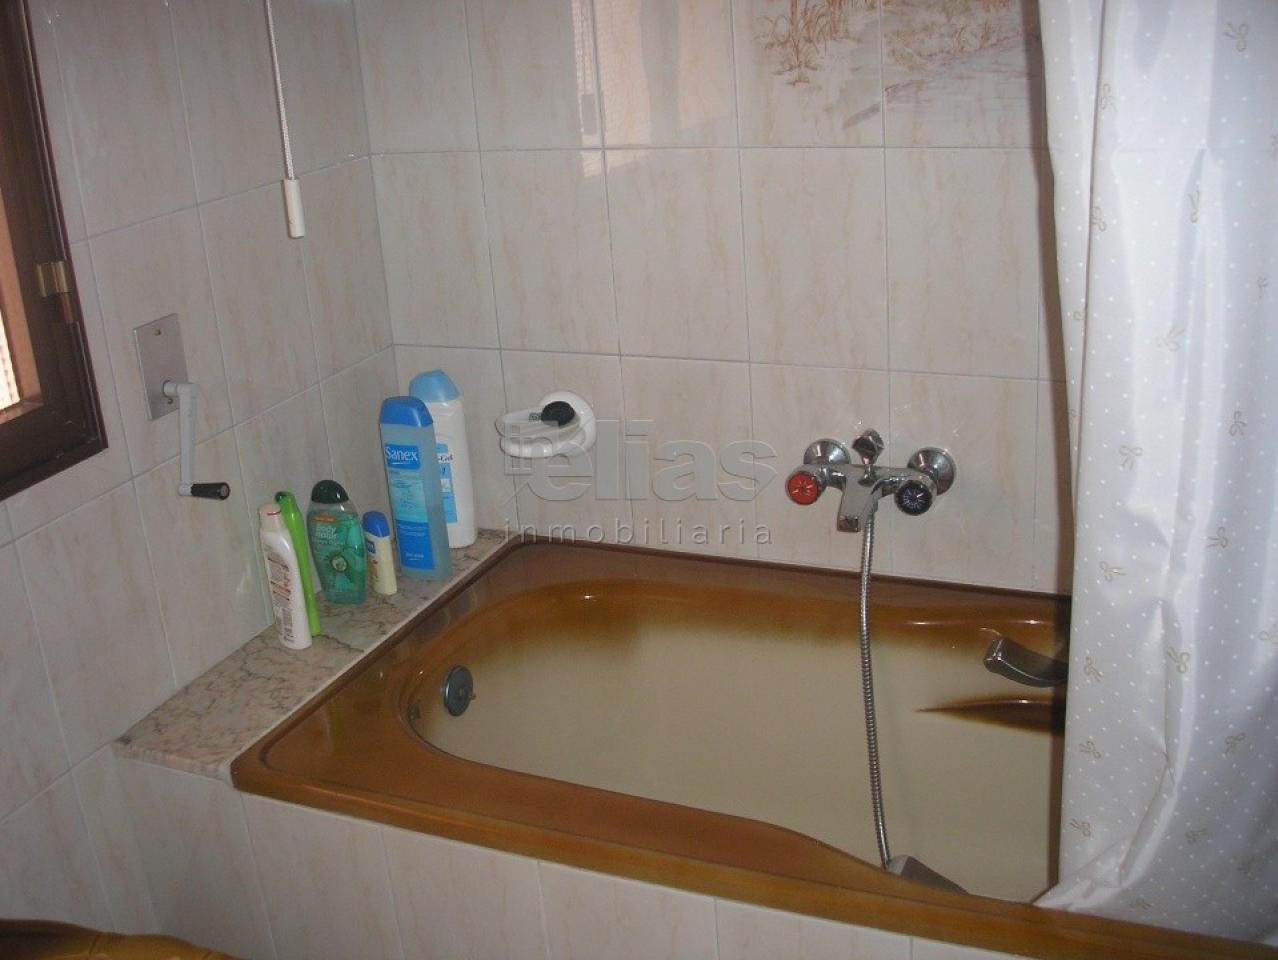 Flat for sale in Baio